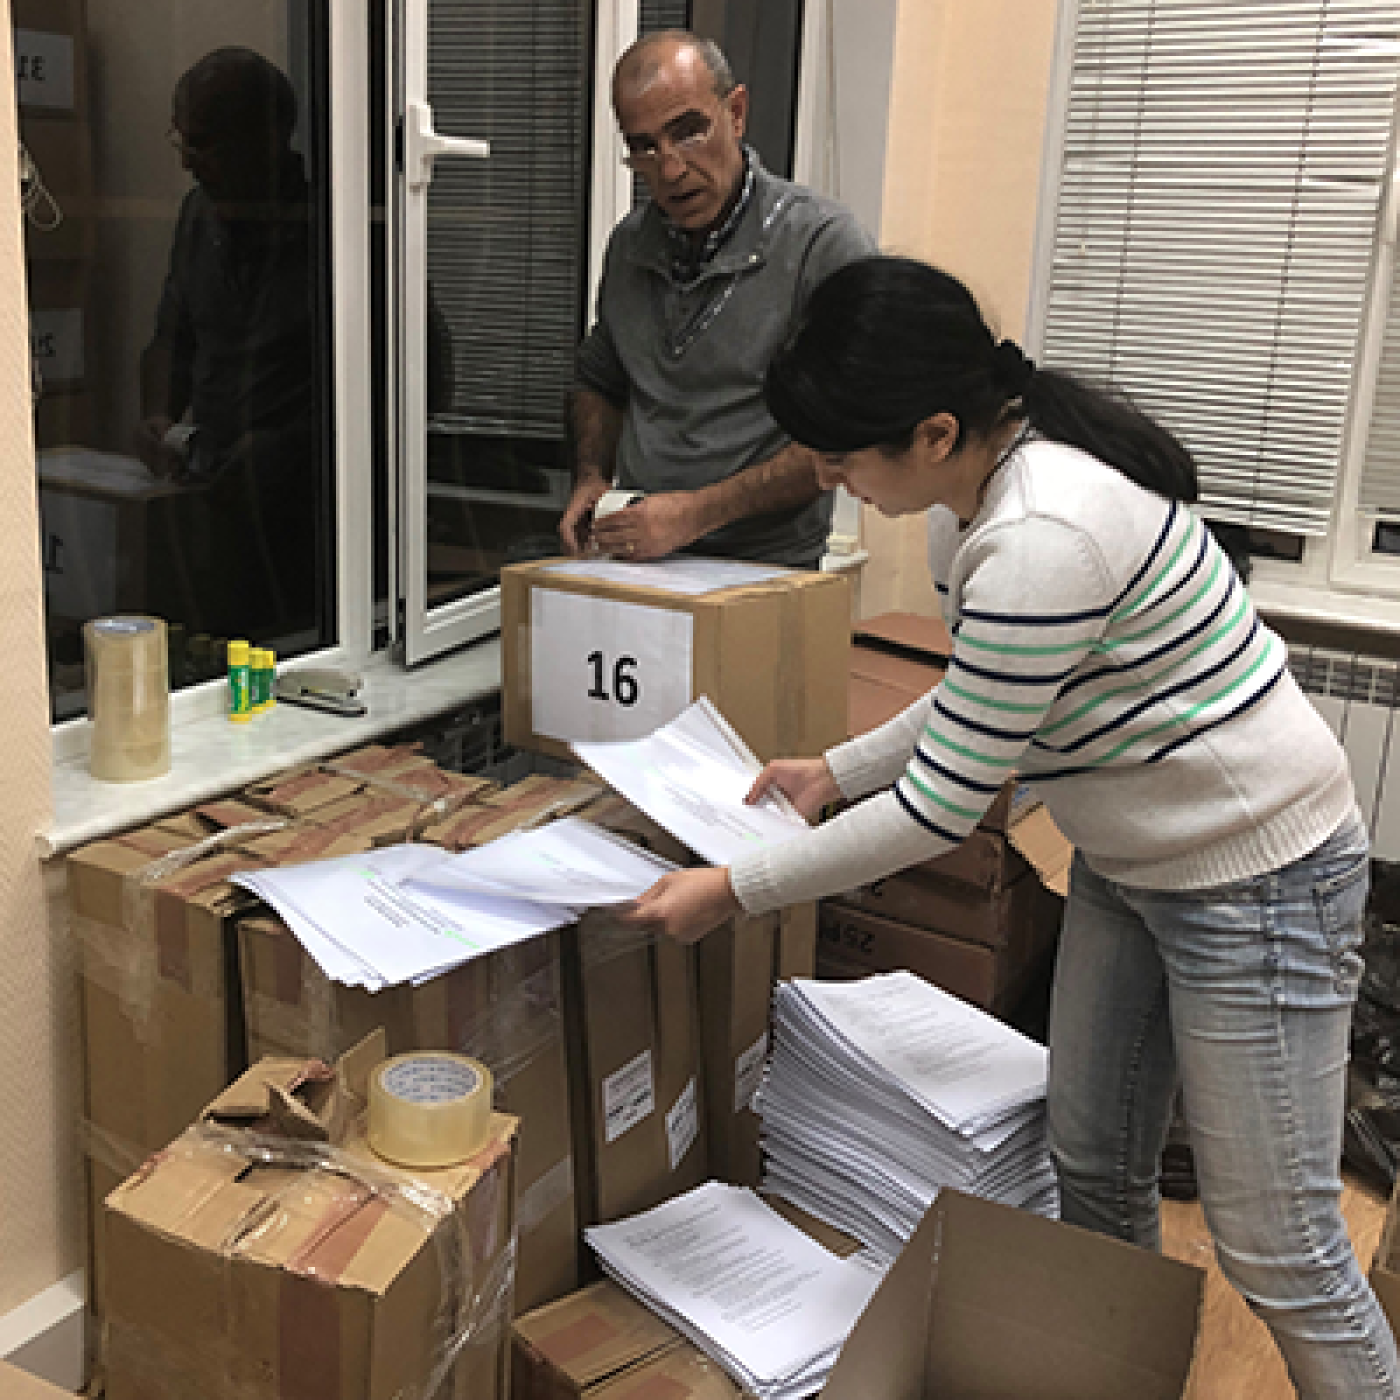 Organization of delivery of poll worker training materials at IFES' Armenia office